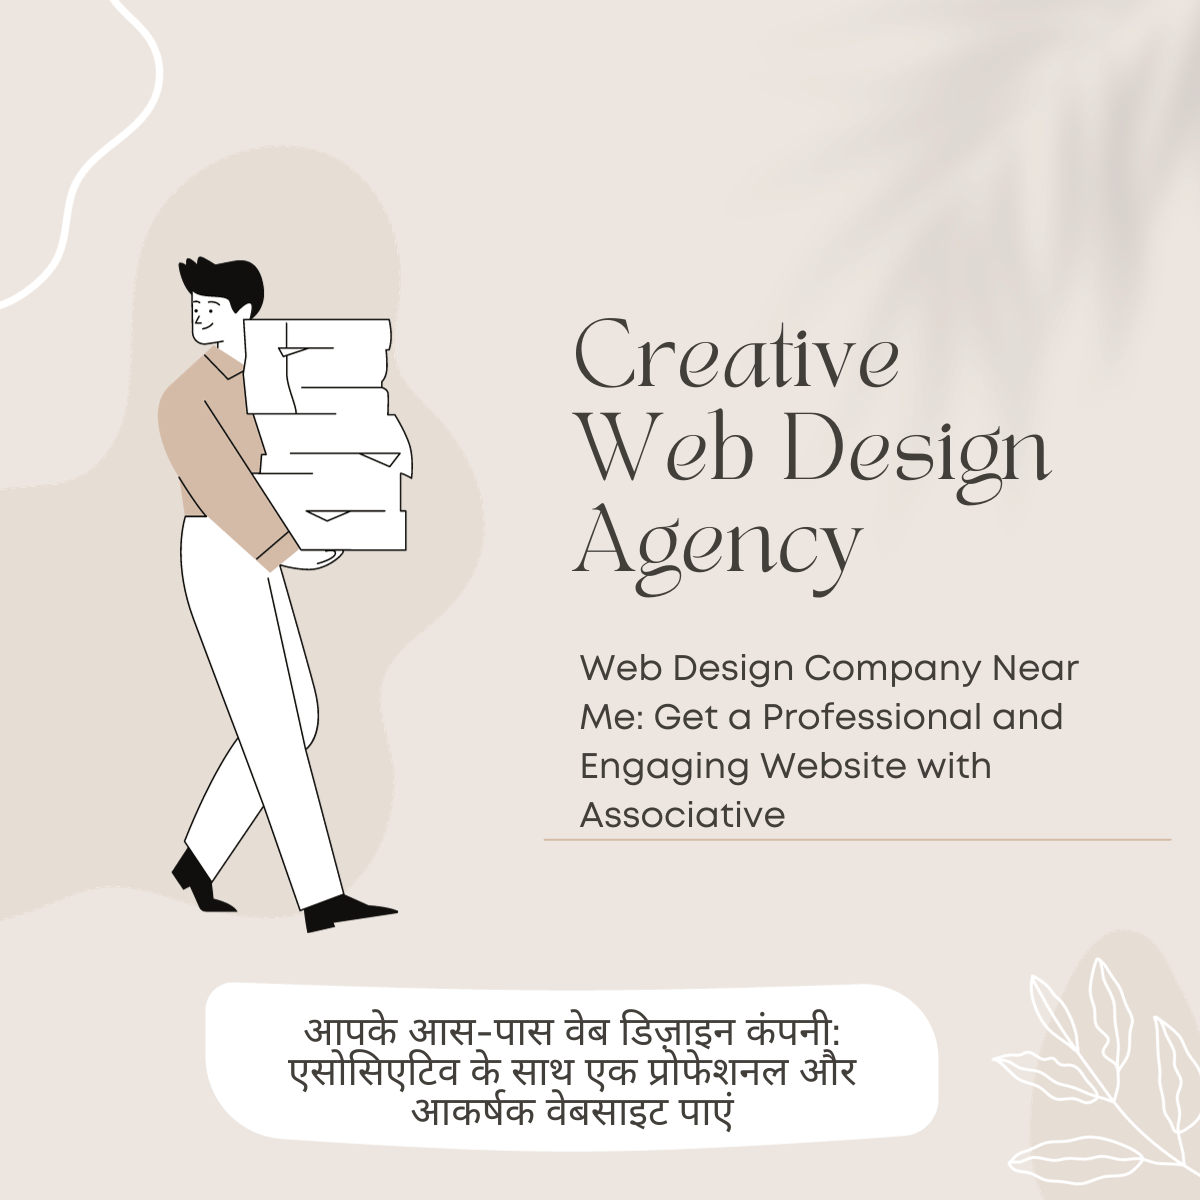 Web Design Company: Get a Professional and Engaging Website